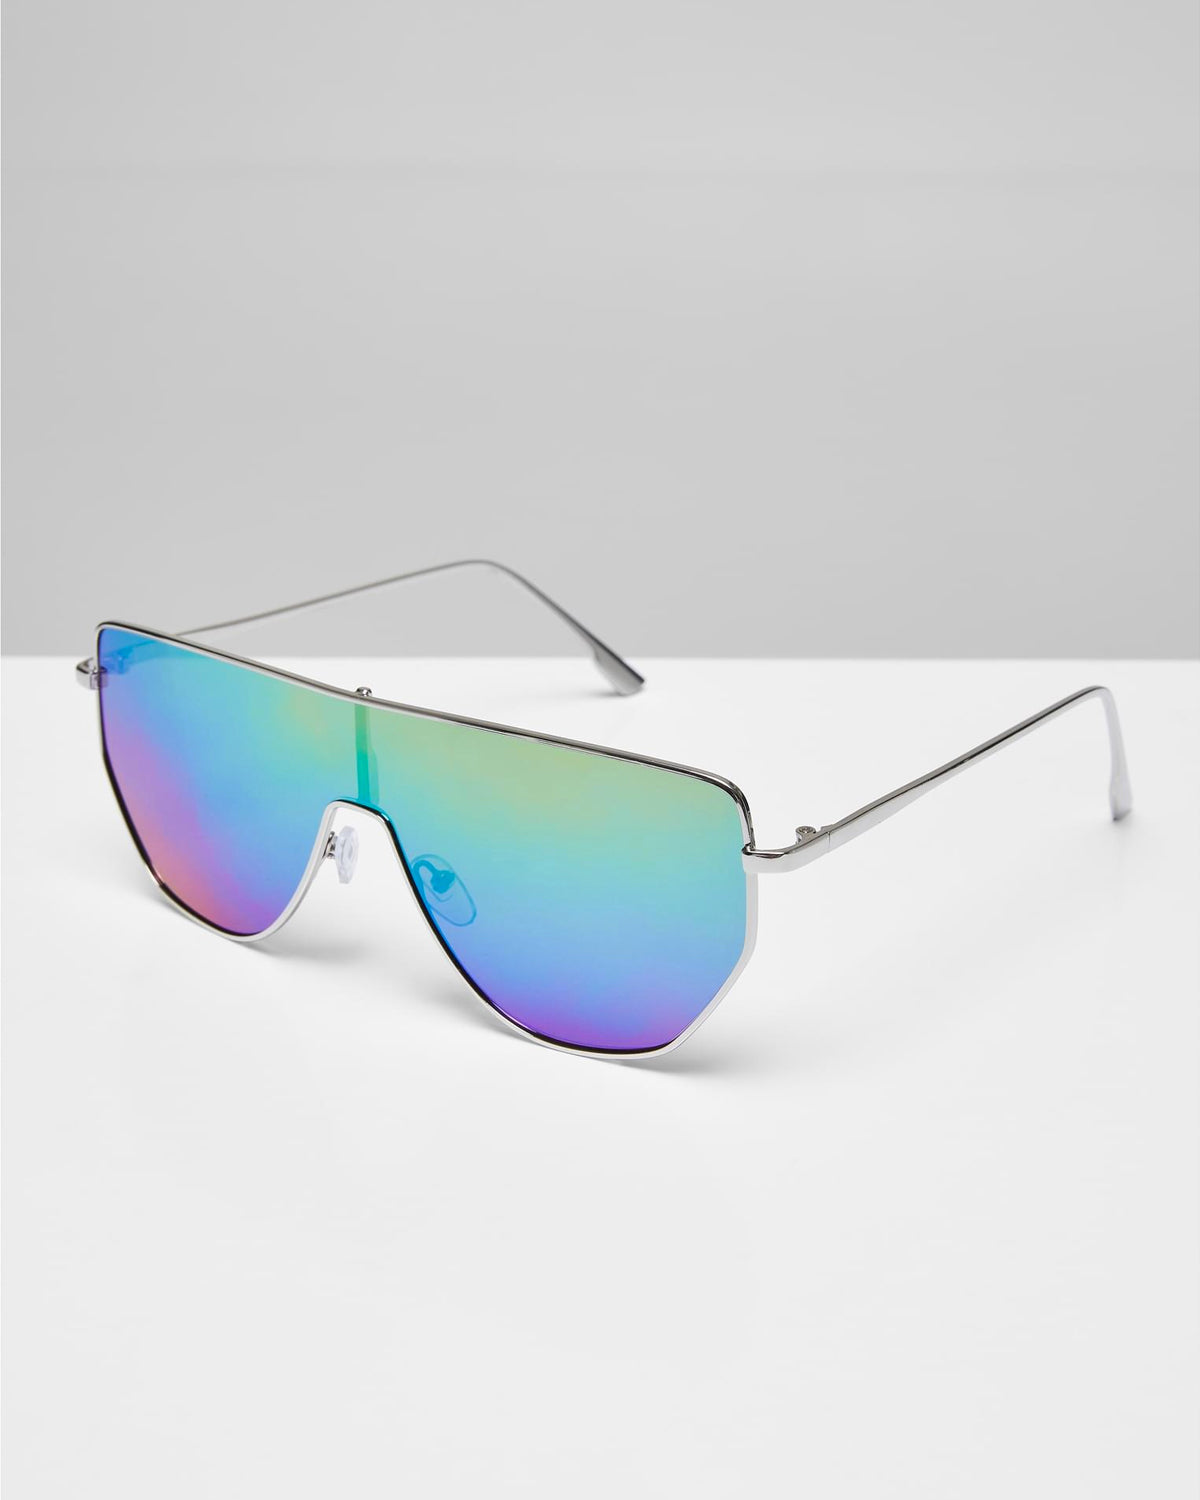 Men\'s sunglasses from domestic store online